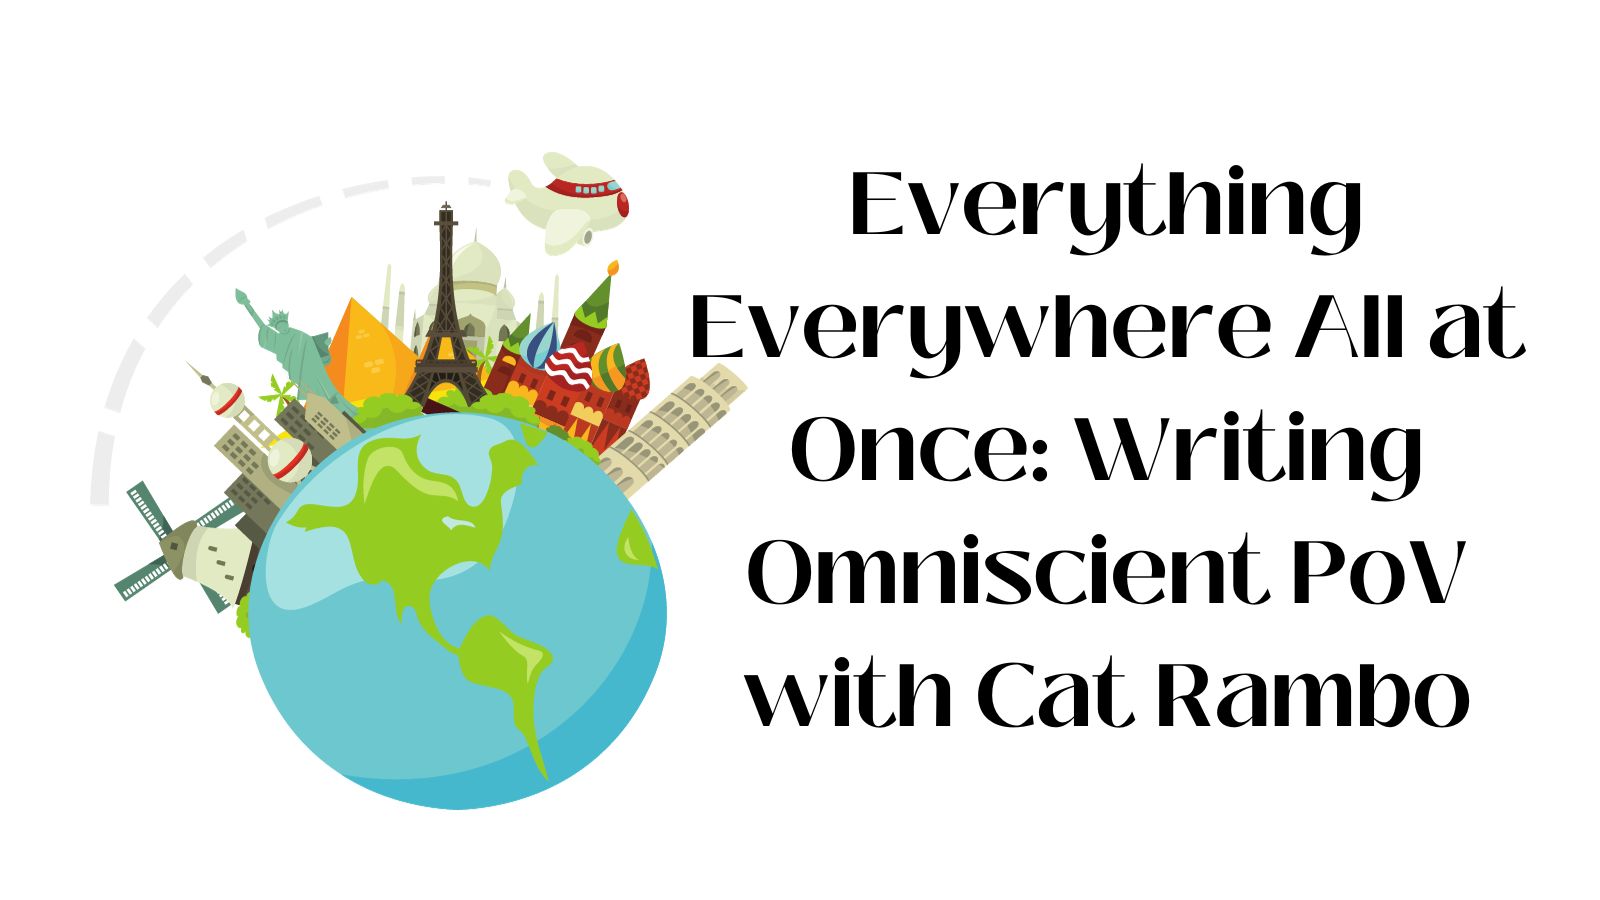 Everything Everywhere All at Once: Writing Omniscient PoV with Cat Rambo